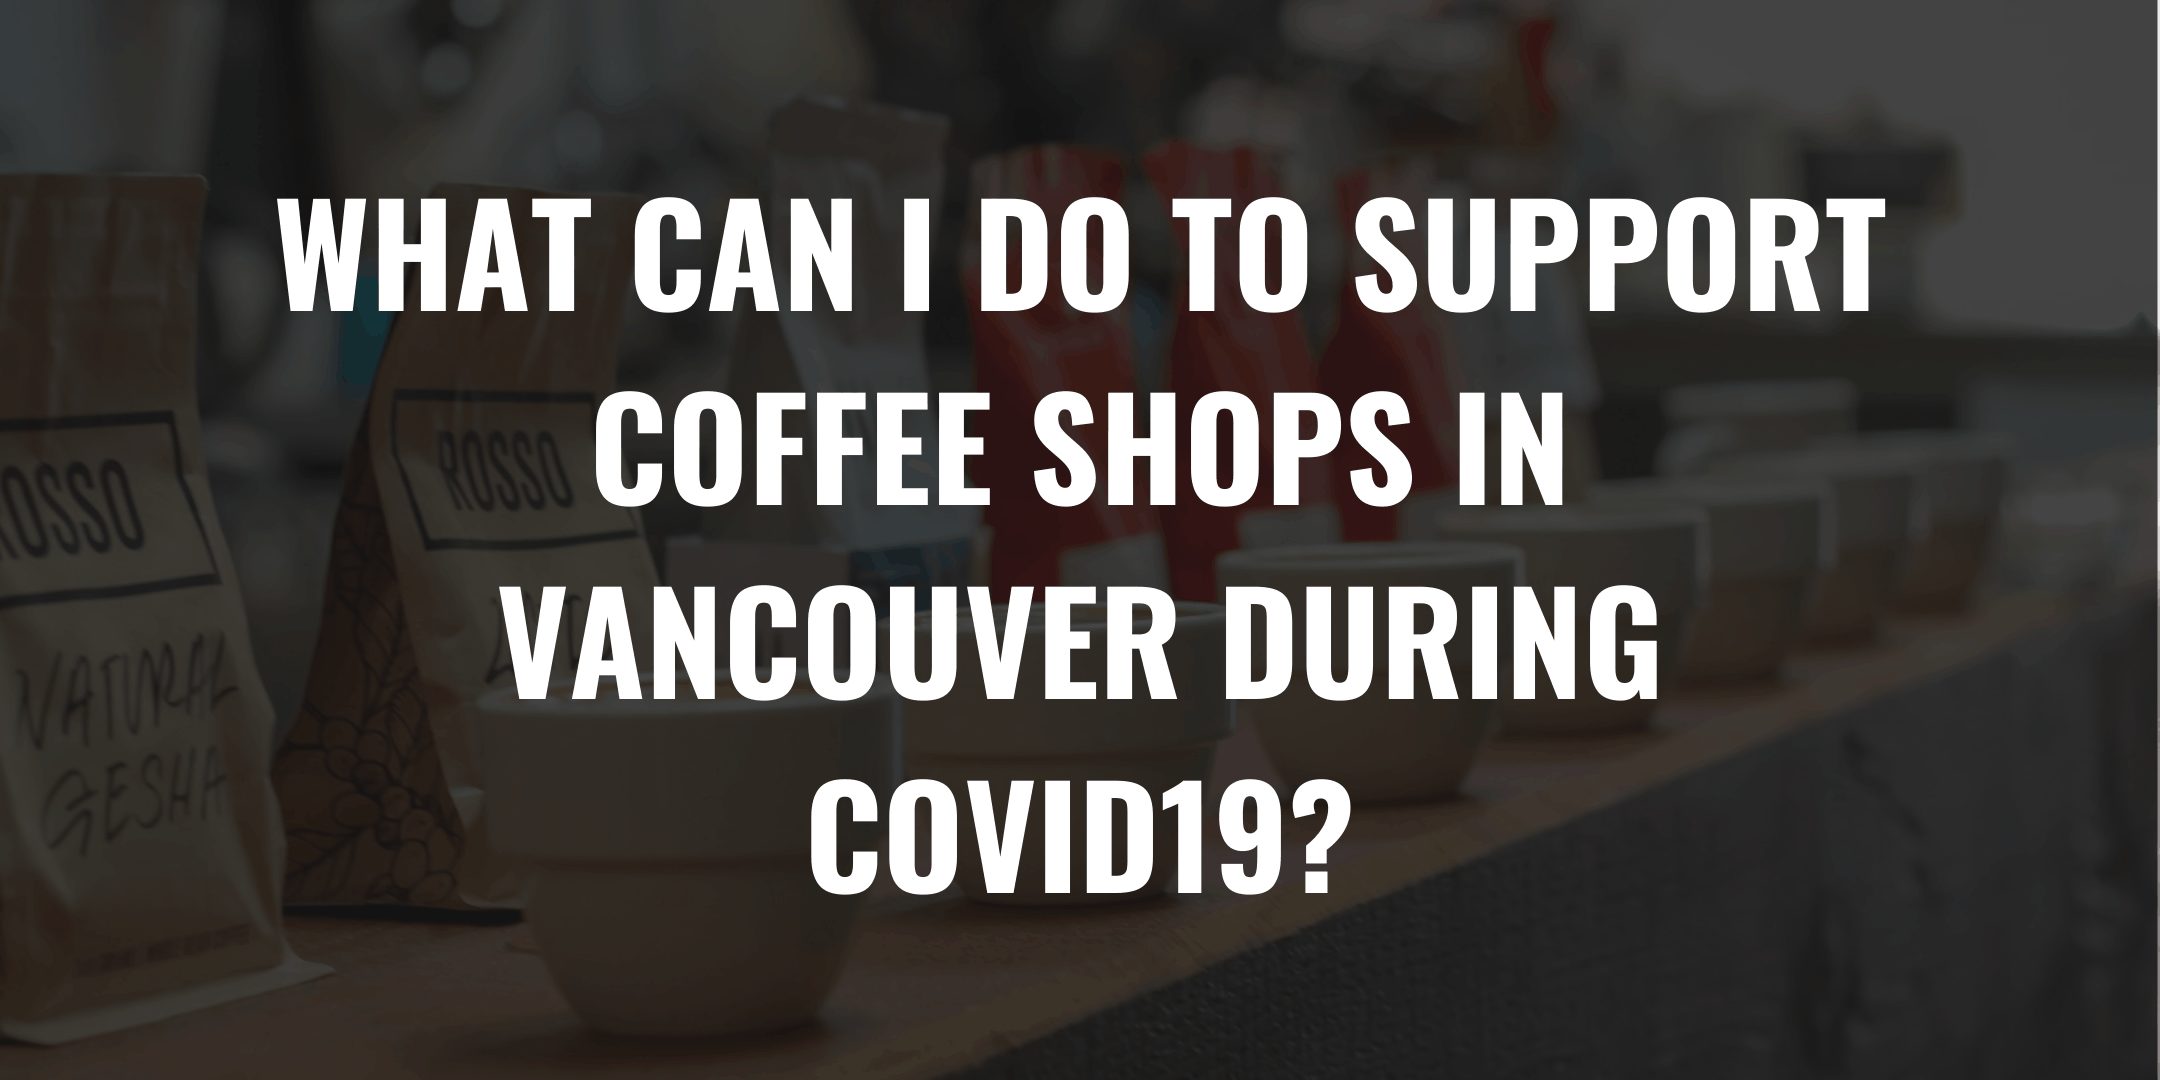 WHAT CAN I DO TO SUPPORT COFFEE SHOPS IN VANCOUVER DURING COVID19